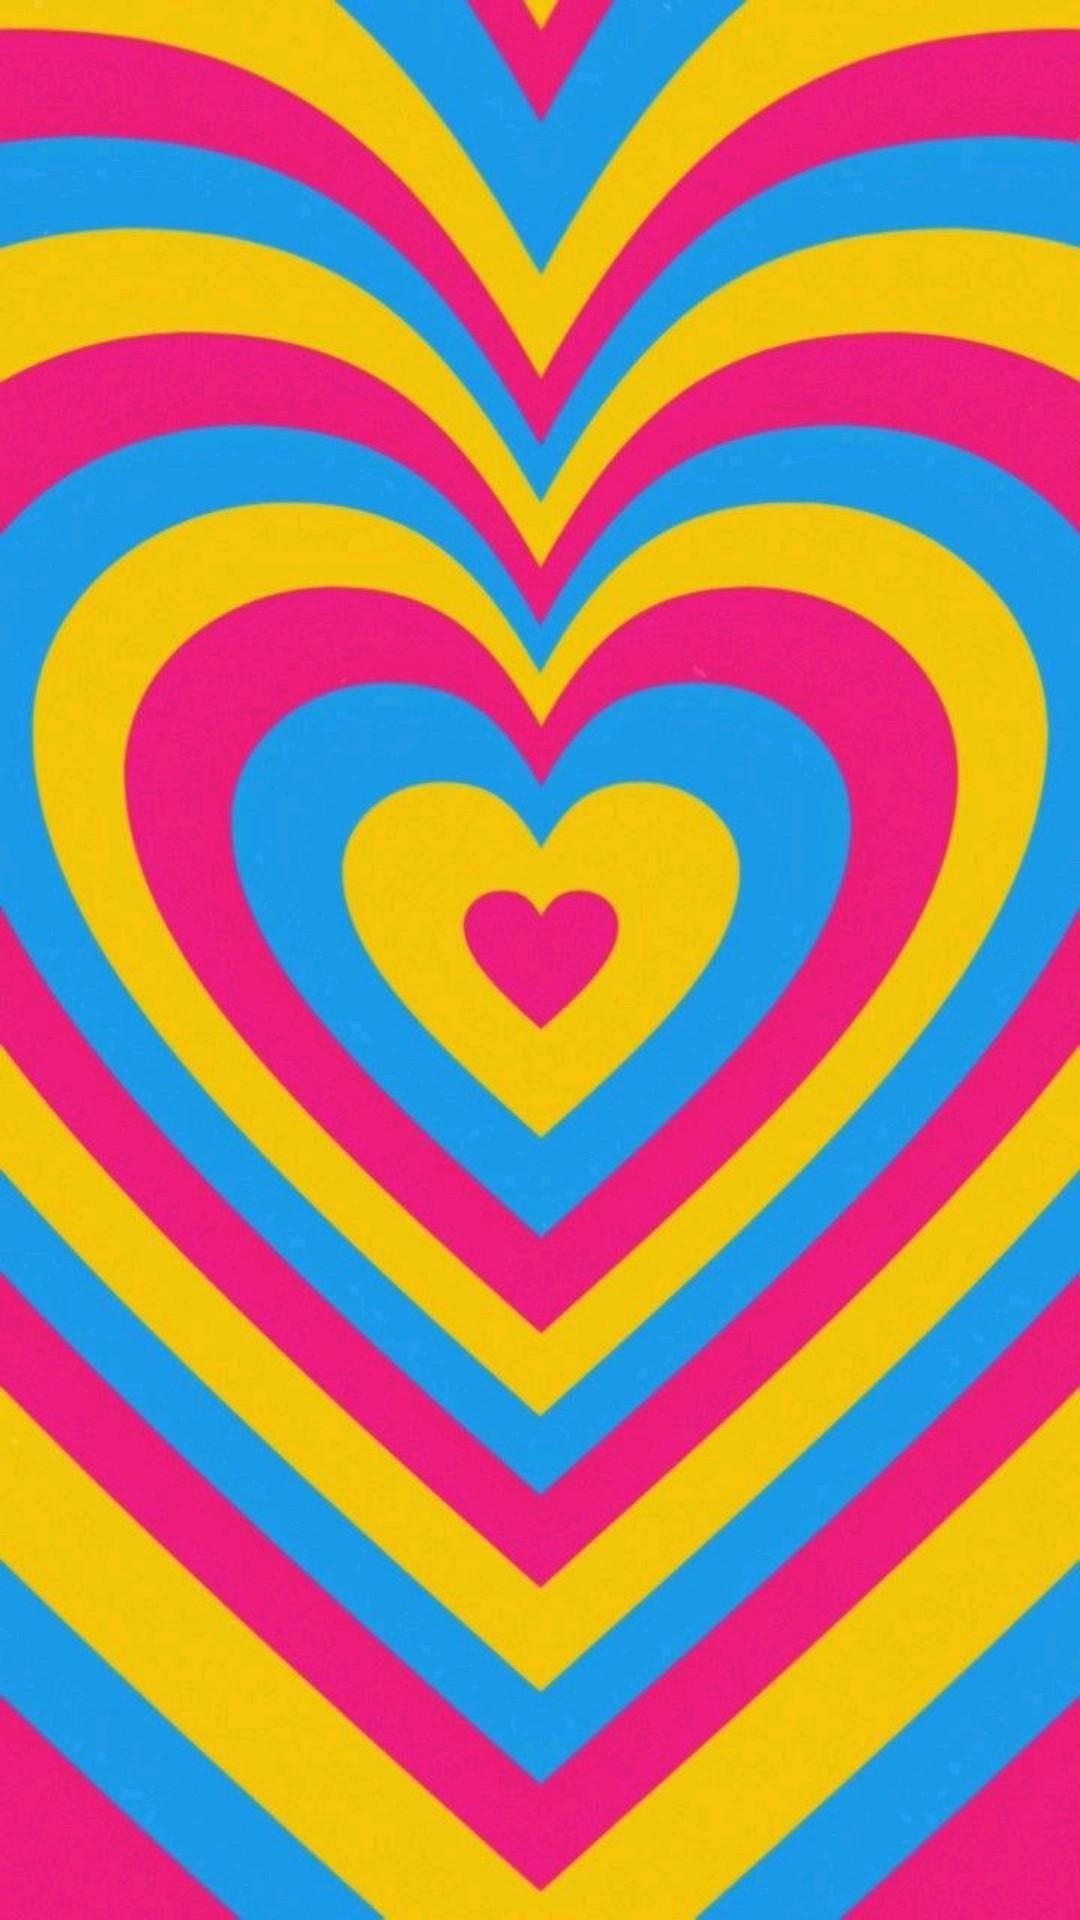 Wallpaper iPhone Heart with high-resolution 1080x1920 pixel. You can use this wallpaper for your iPhone 5, 6, 7, 8, X, XS, XR backgrounds, Mobile Screensaver, or iPad Lock Screen - Pansexual